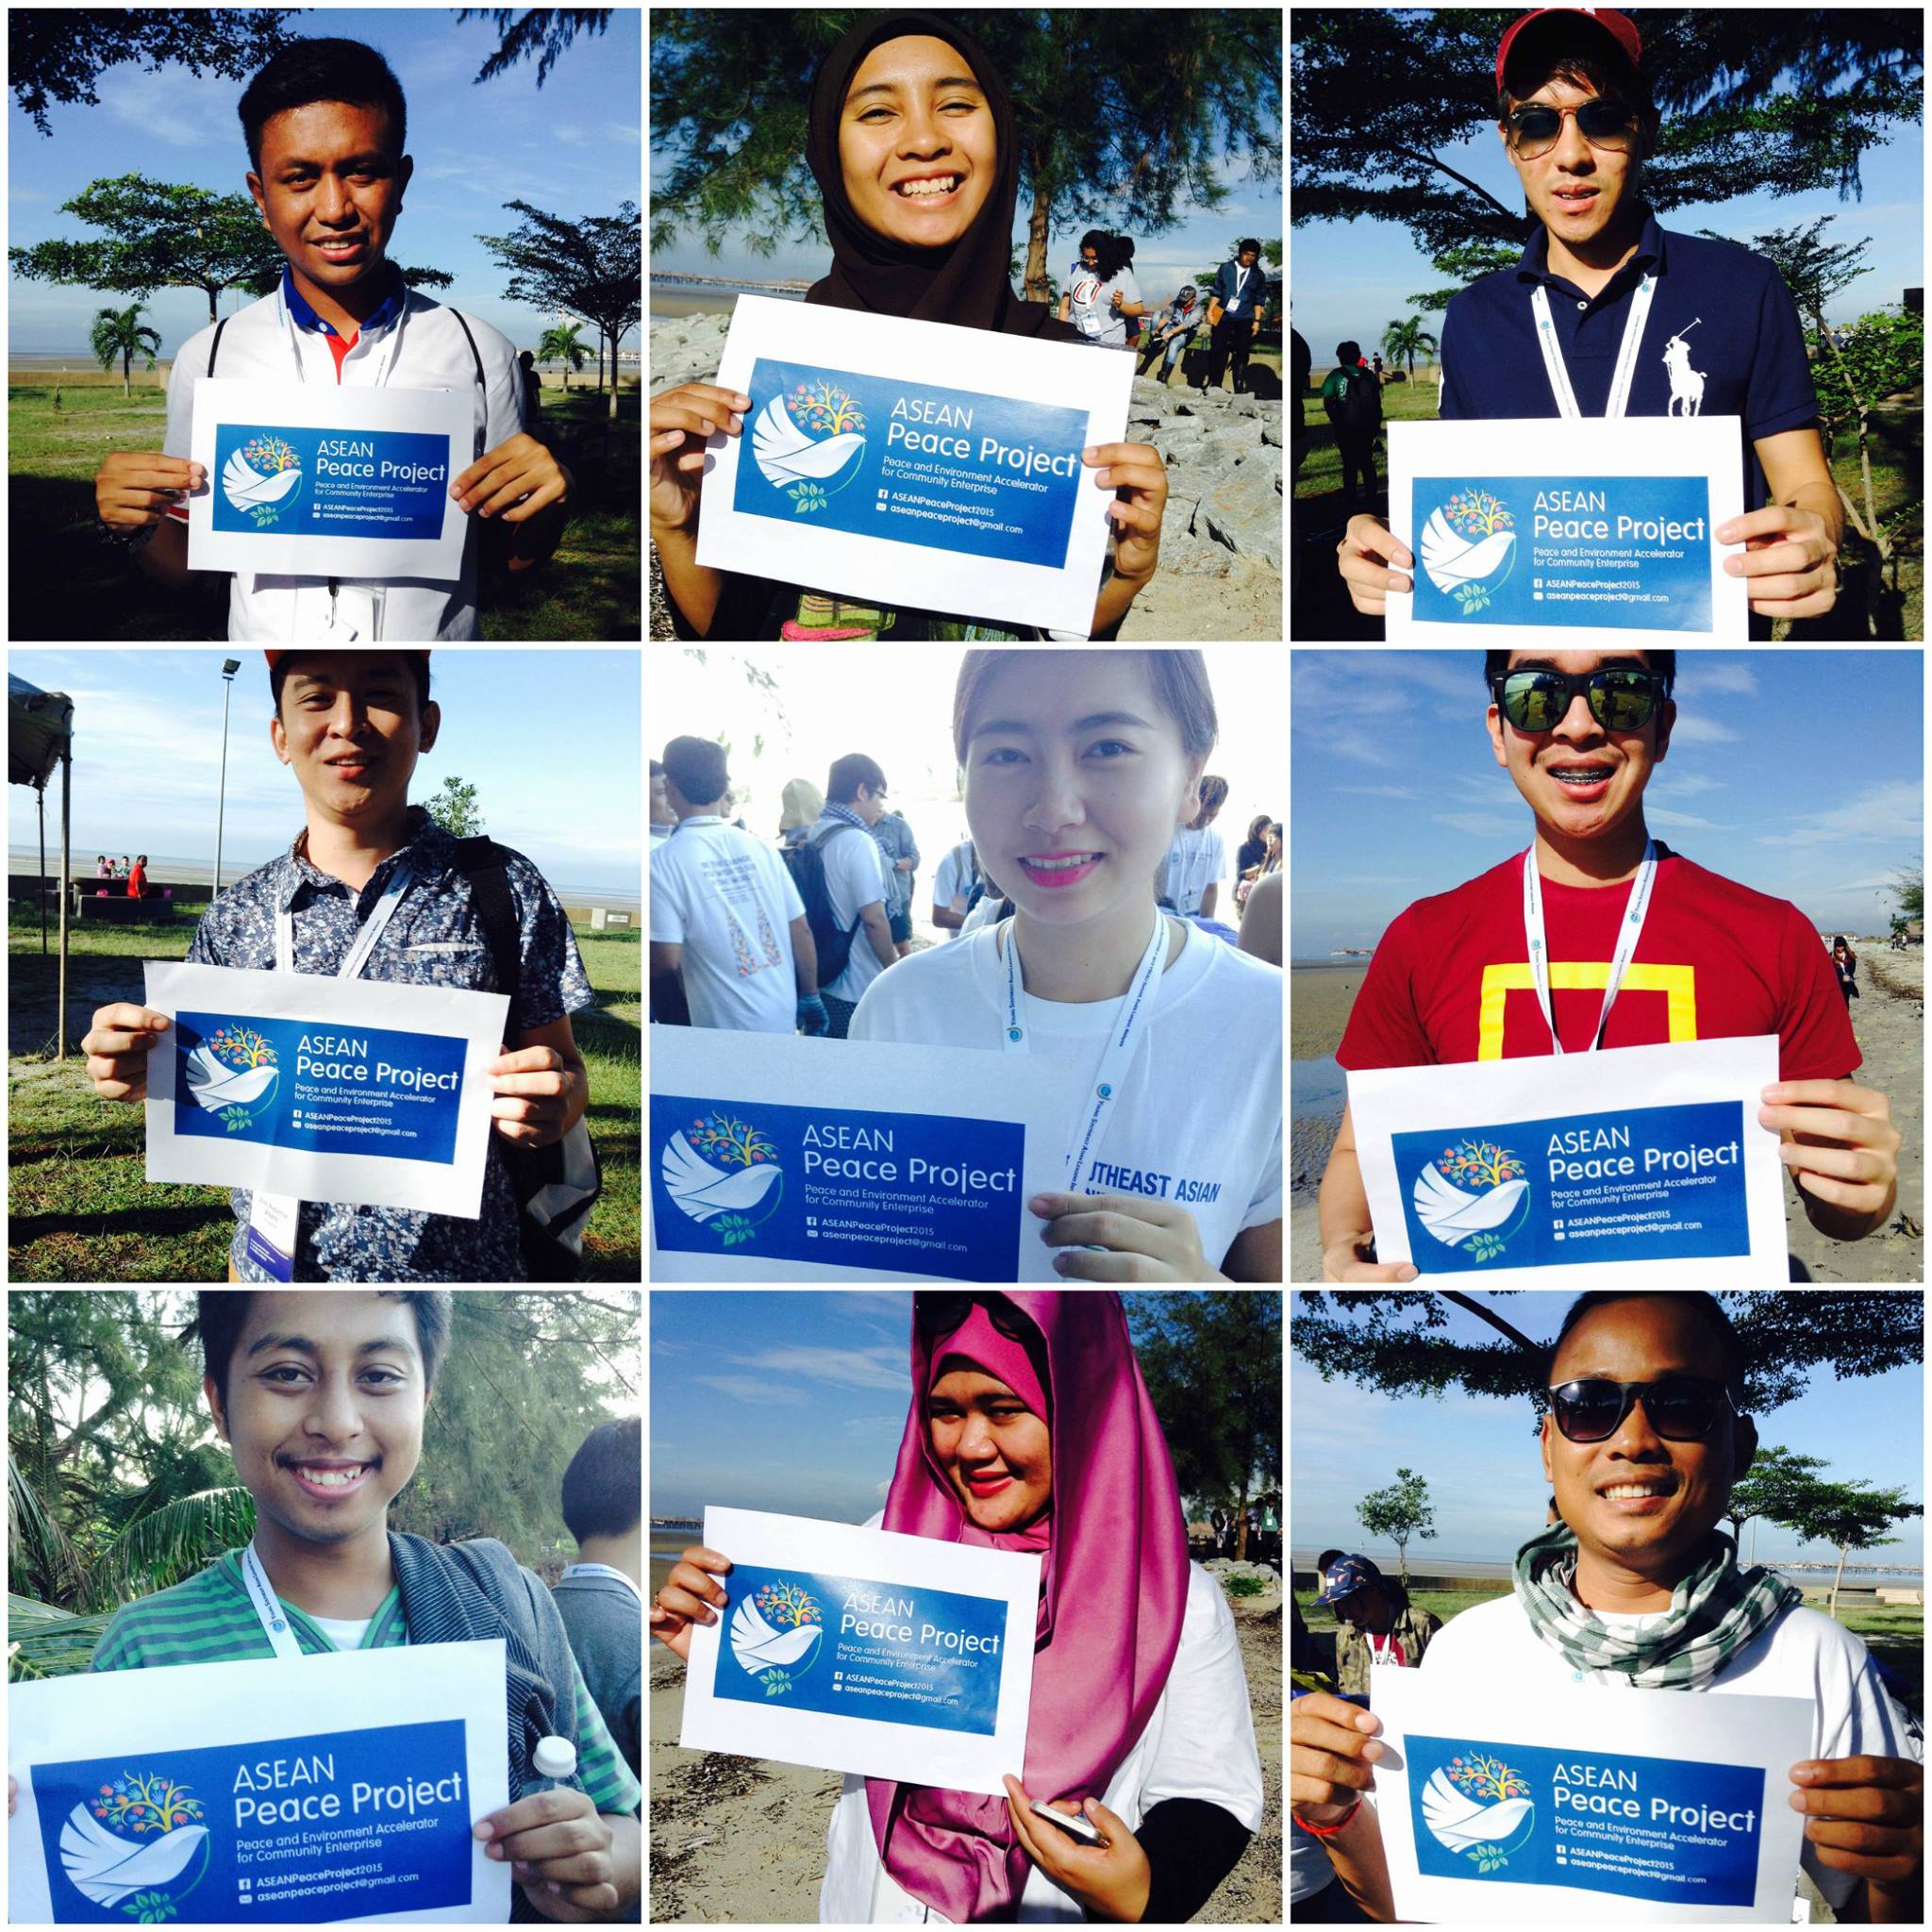 YSEALI members show support for ASEAN Peace Project during the YSEALI Summit in Malaysia in November 2015